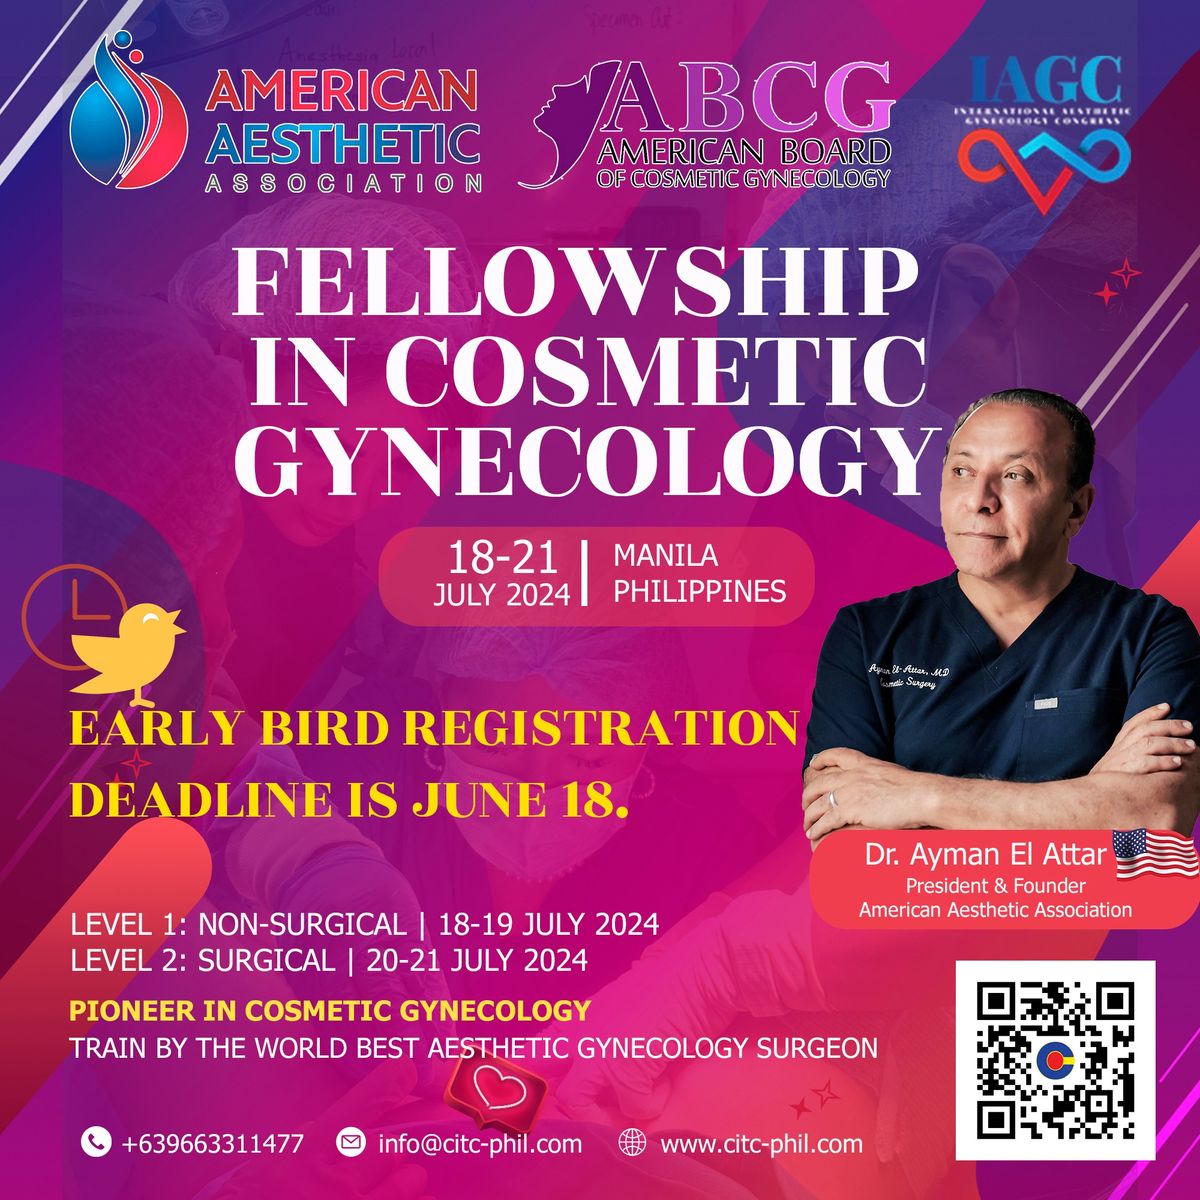 Fellowship in Cosmetic Gynecology Course